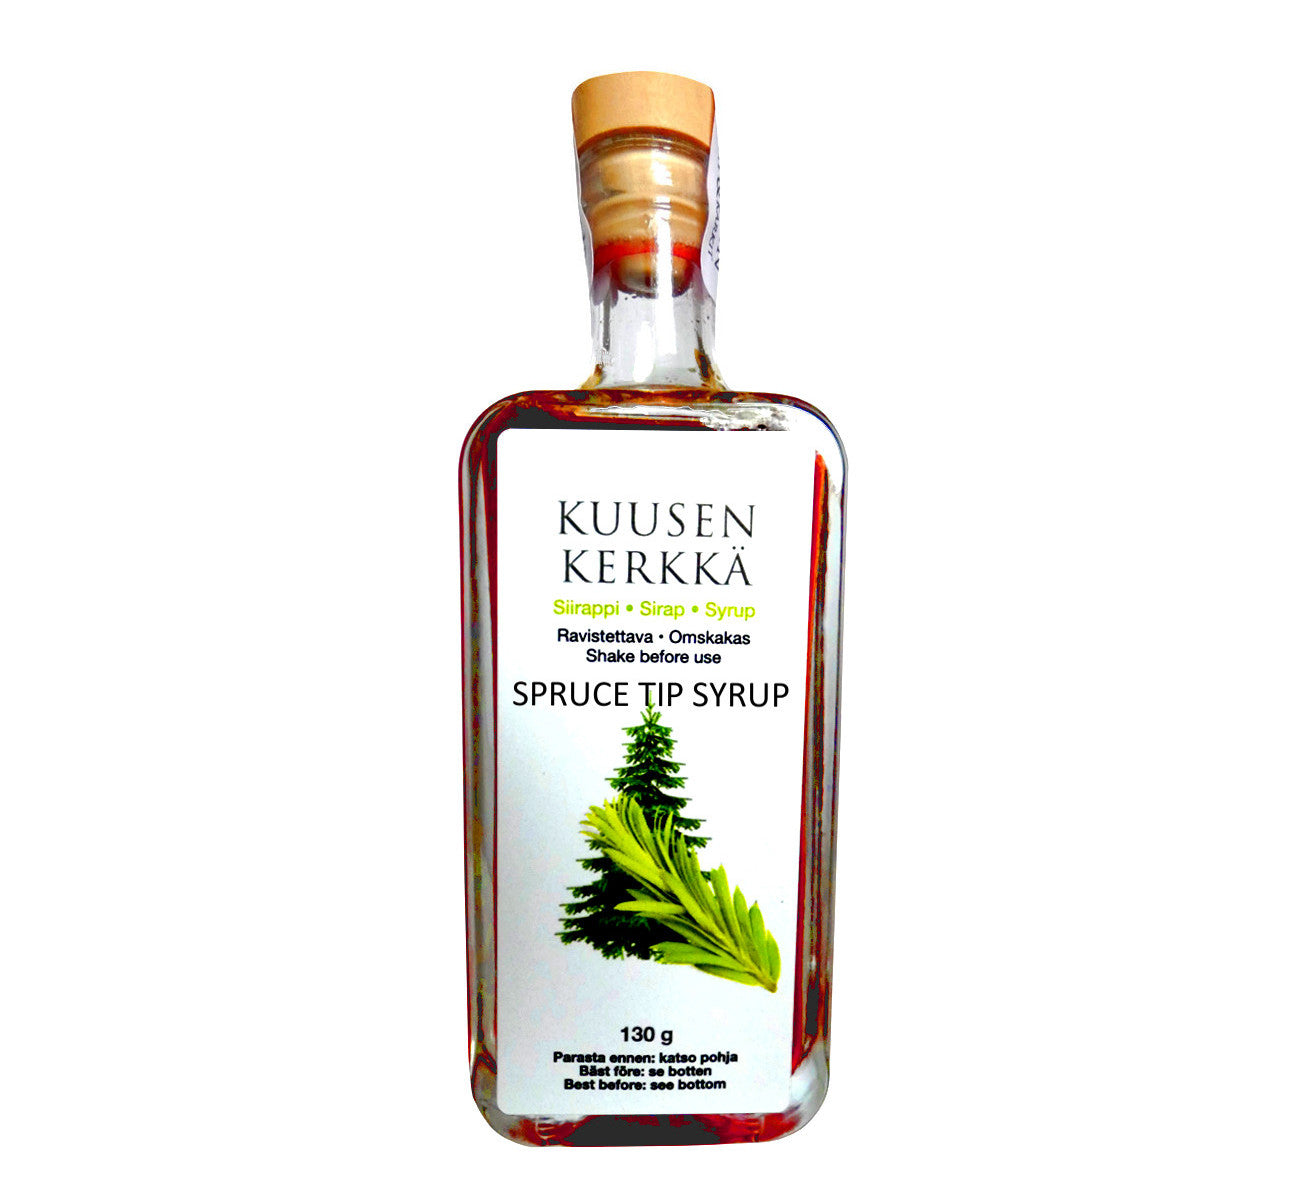 Gourmet wild spruce tip syrup all natural, 130 g, handmade in Finland from pure Lapland spruces.